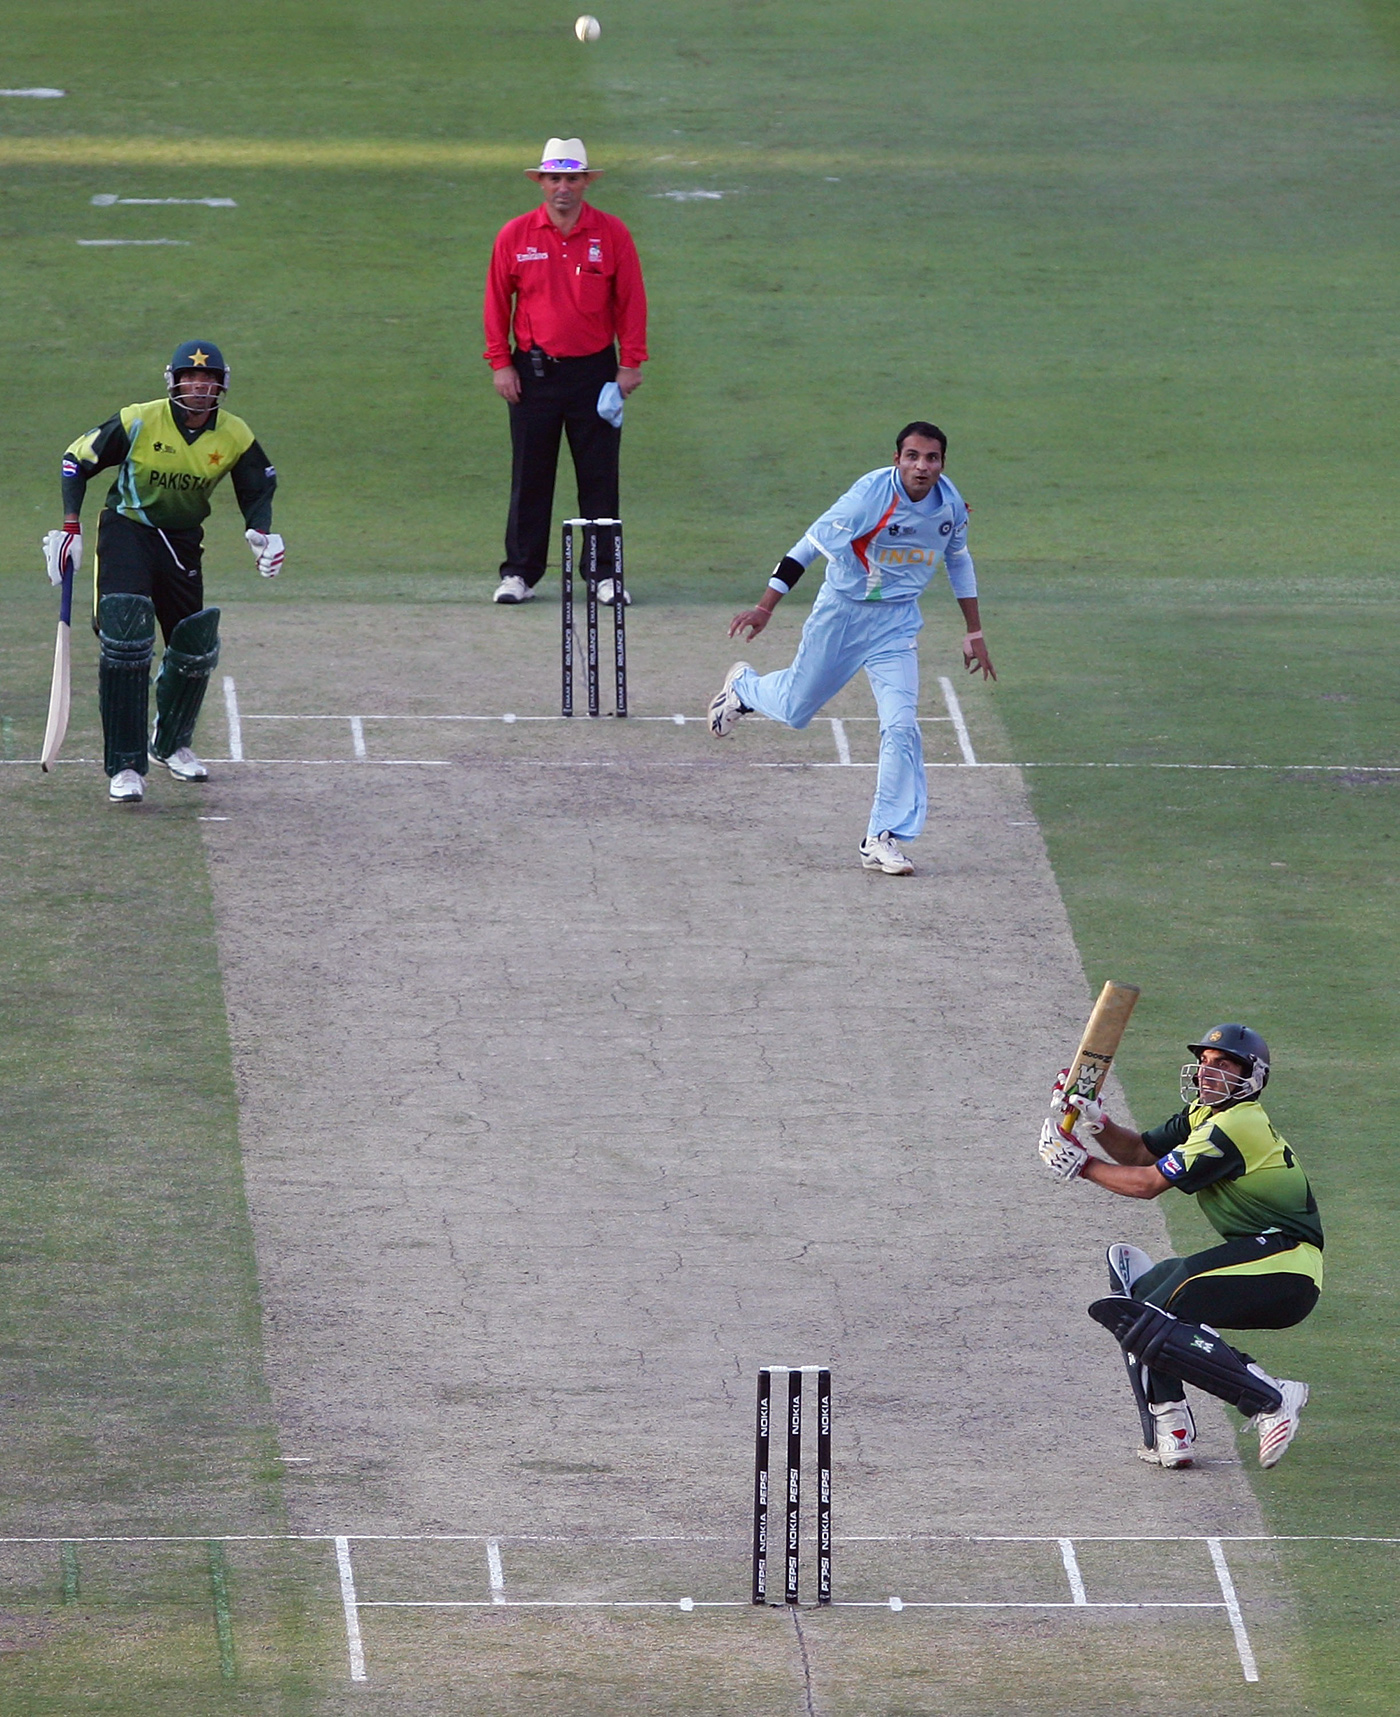 That fateful scoop - Misbah-ul-Haq scoops Joginder Sharma off what was the final ball of the match, India v Pakistan, ICC World Twenty20 final, Johannesburg, September 24, 2007